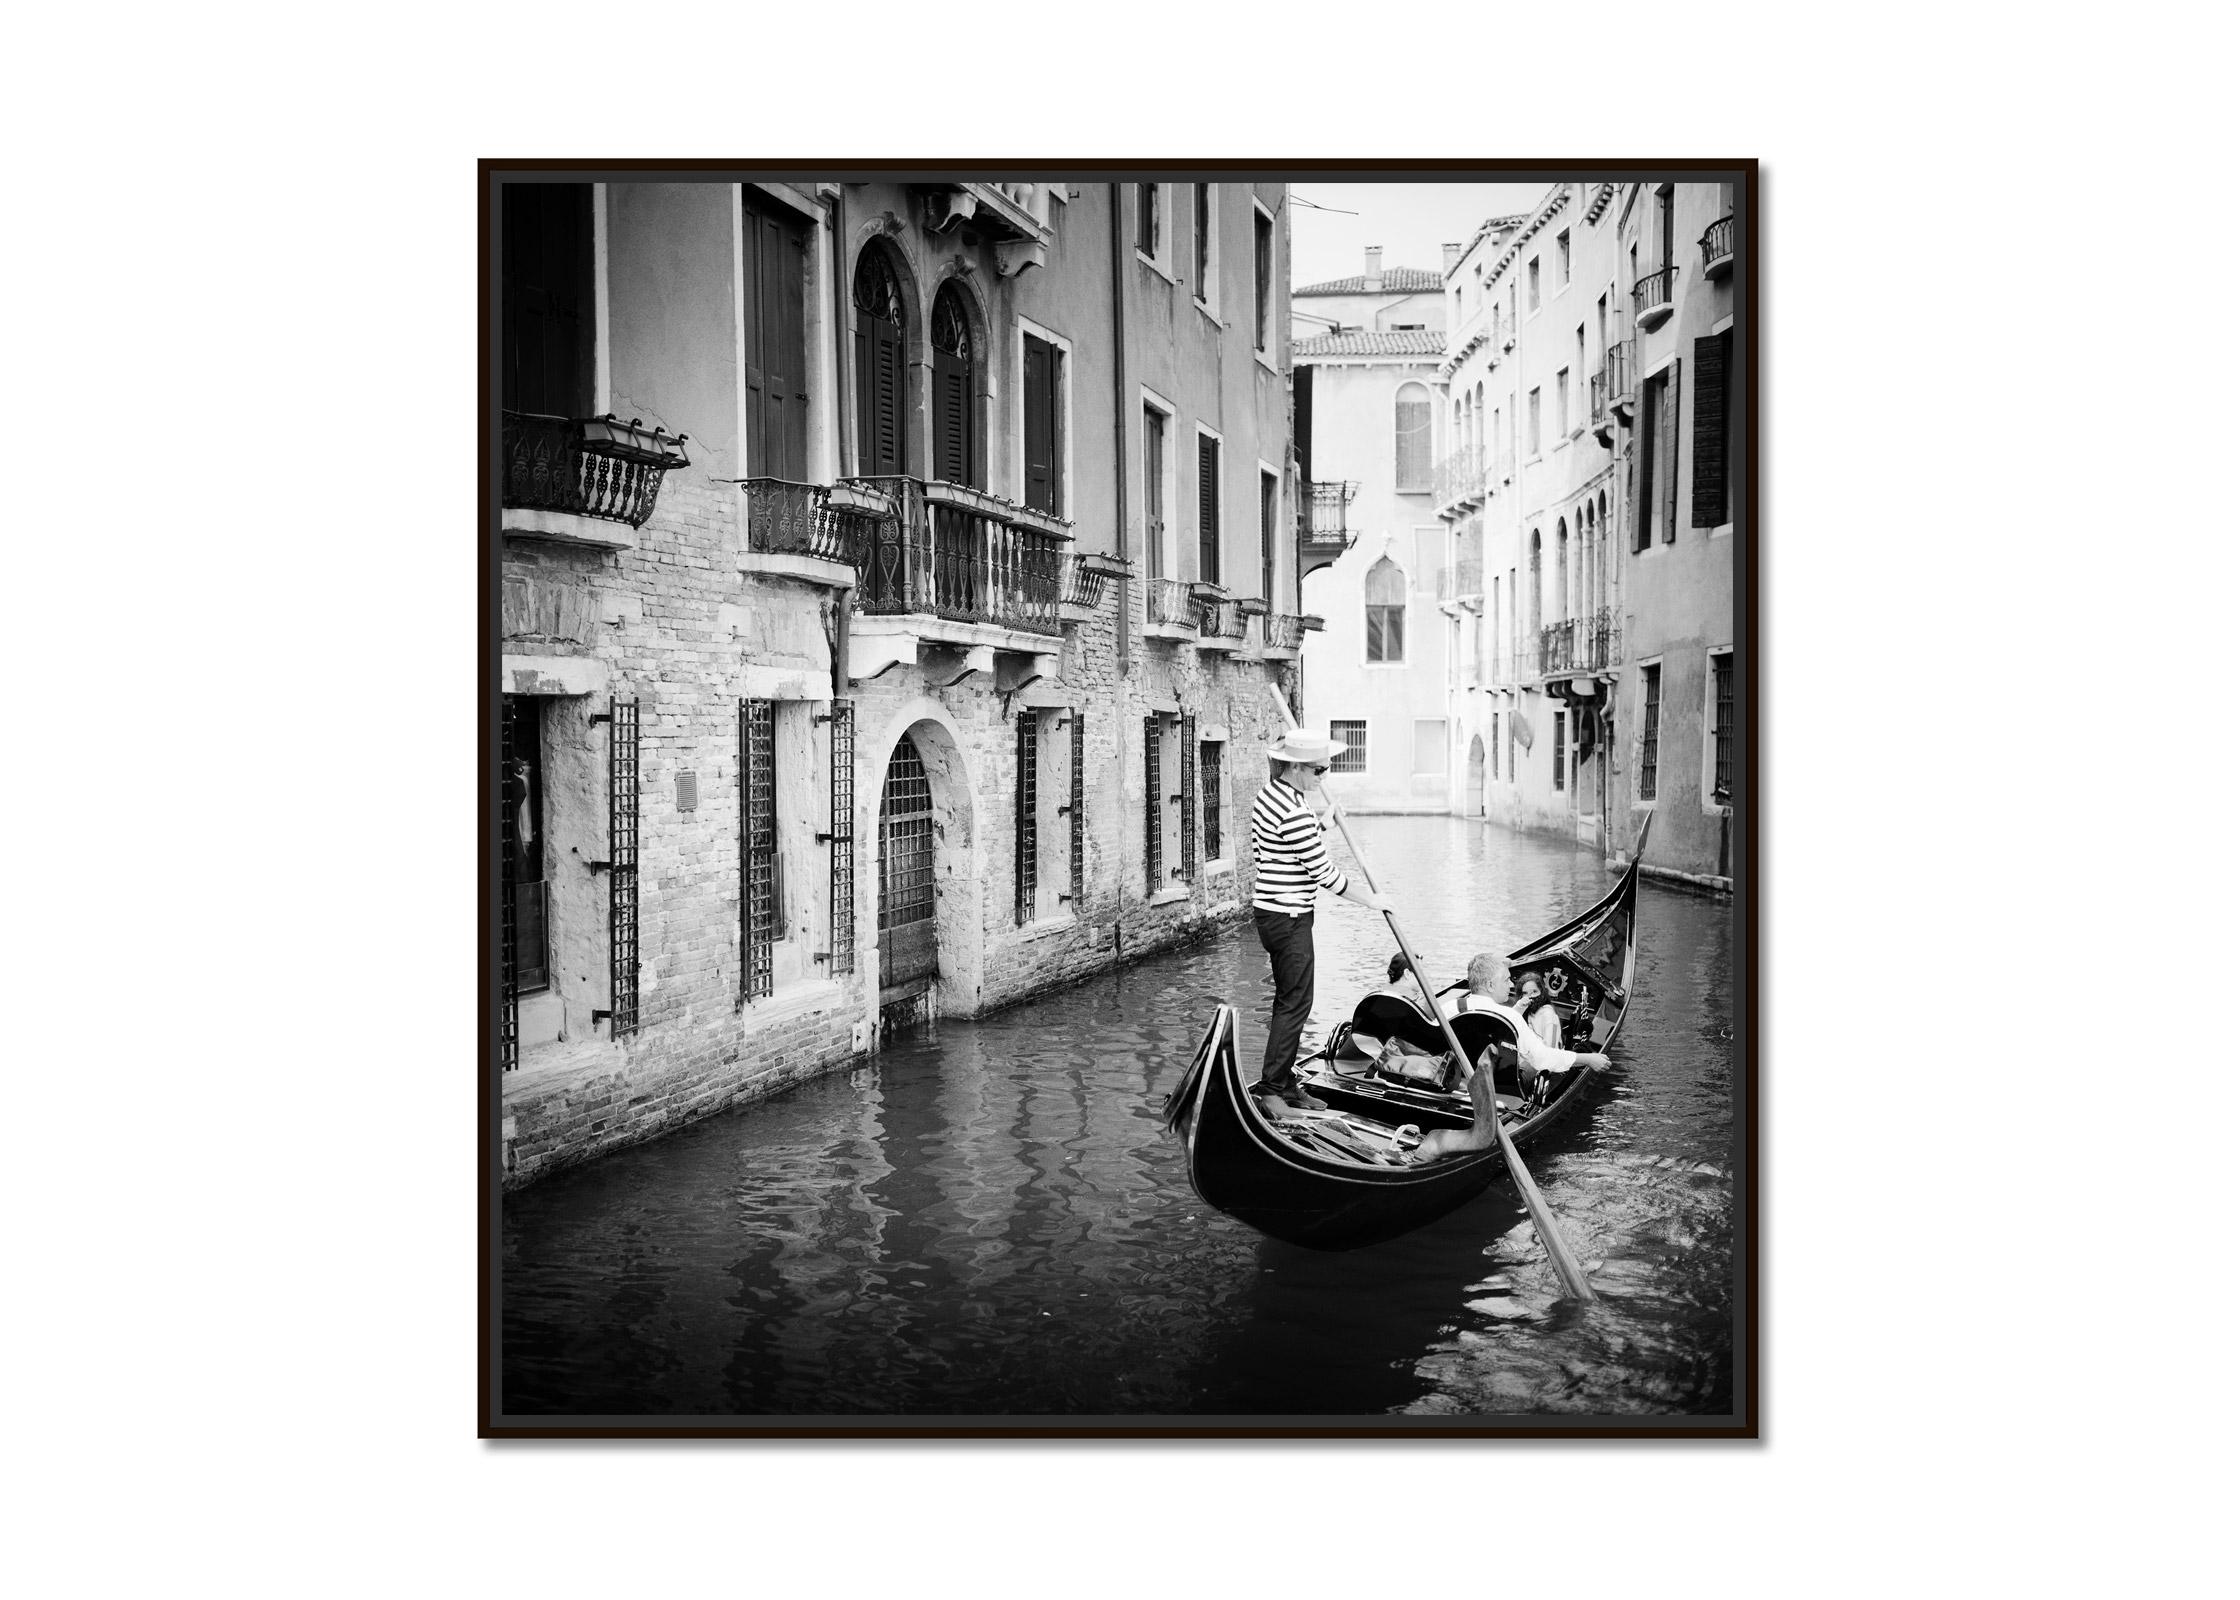 Gondoliere, Gondola, Canal, Venice, black and white art cityscape photography - Photograph by Gerald Berghammer